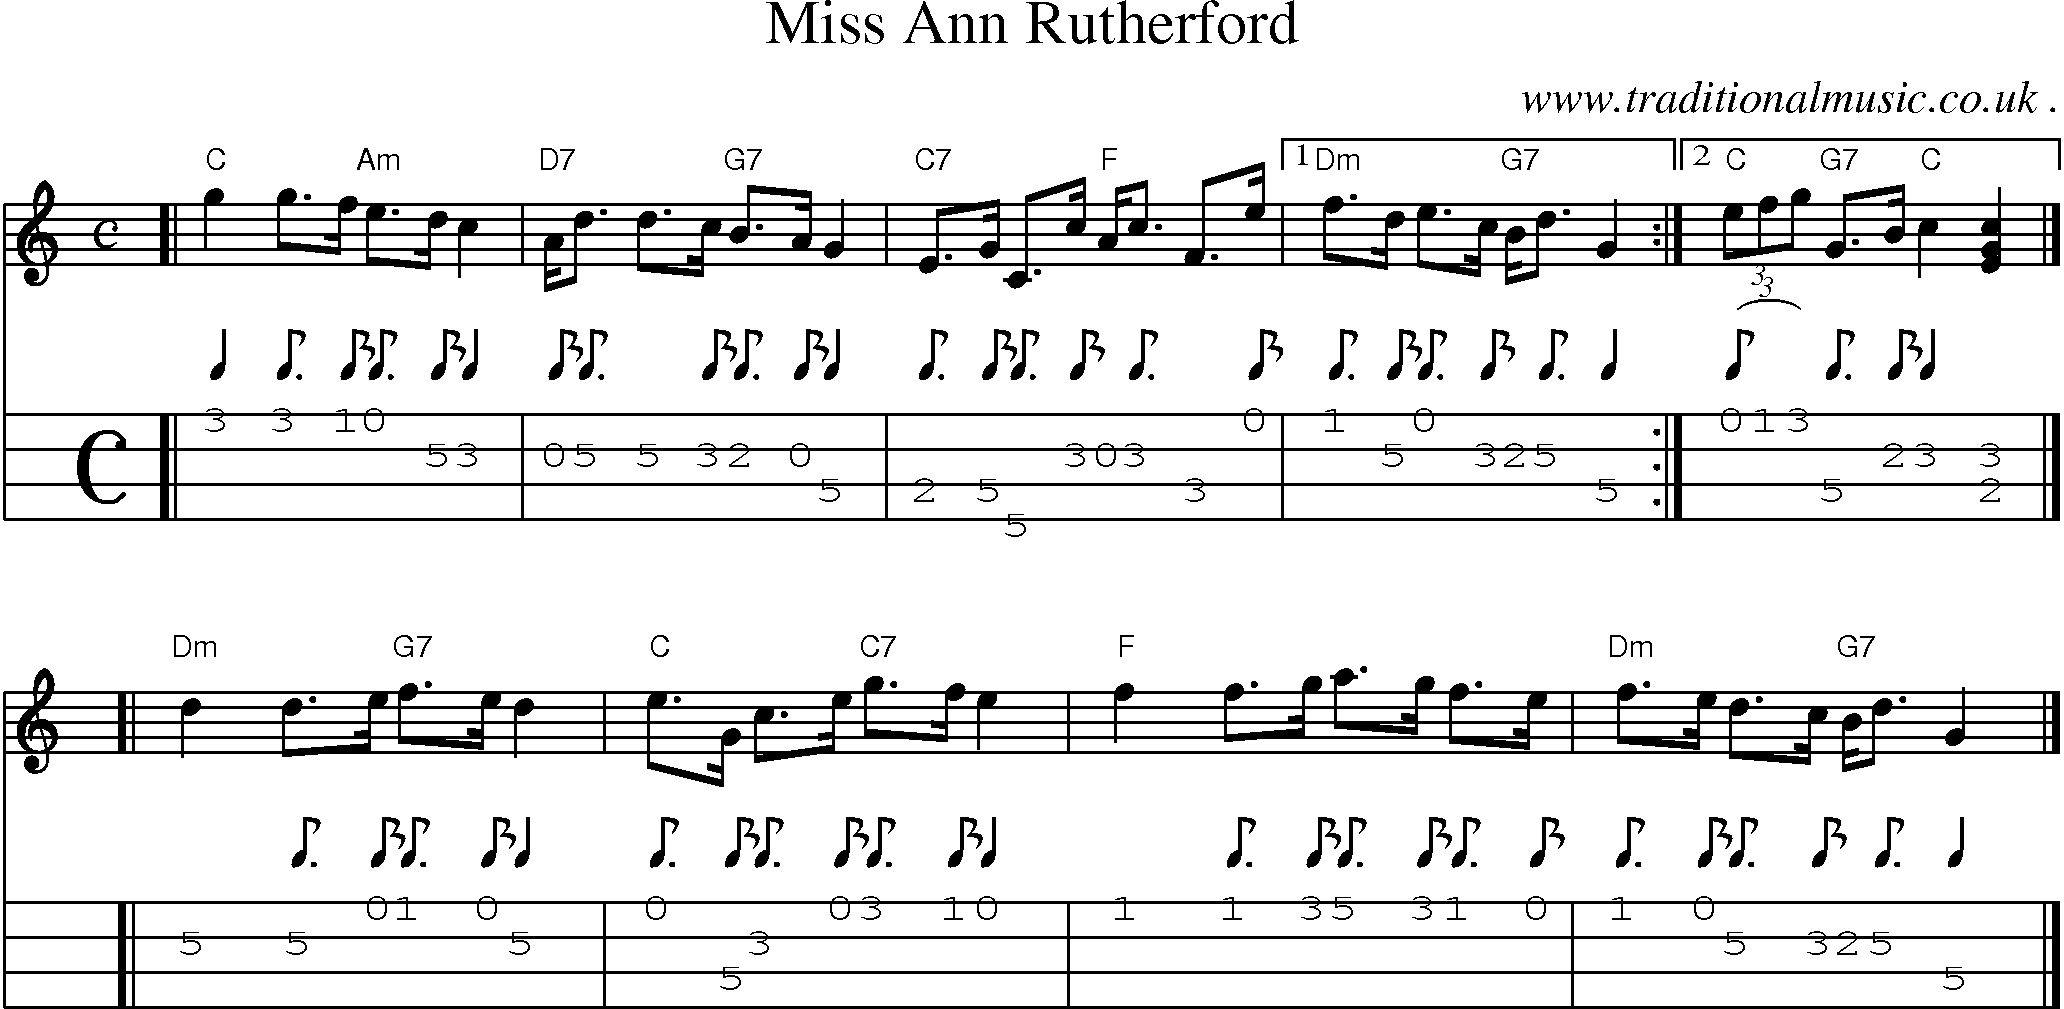 Sheet-music  score, Chords and Mandolin Tabs for Miss Ann Rutherford